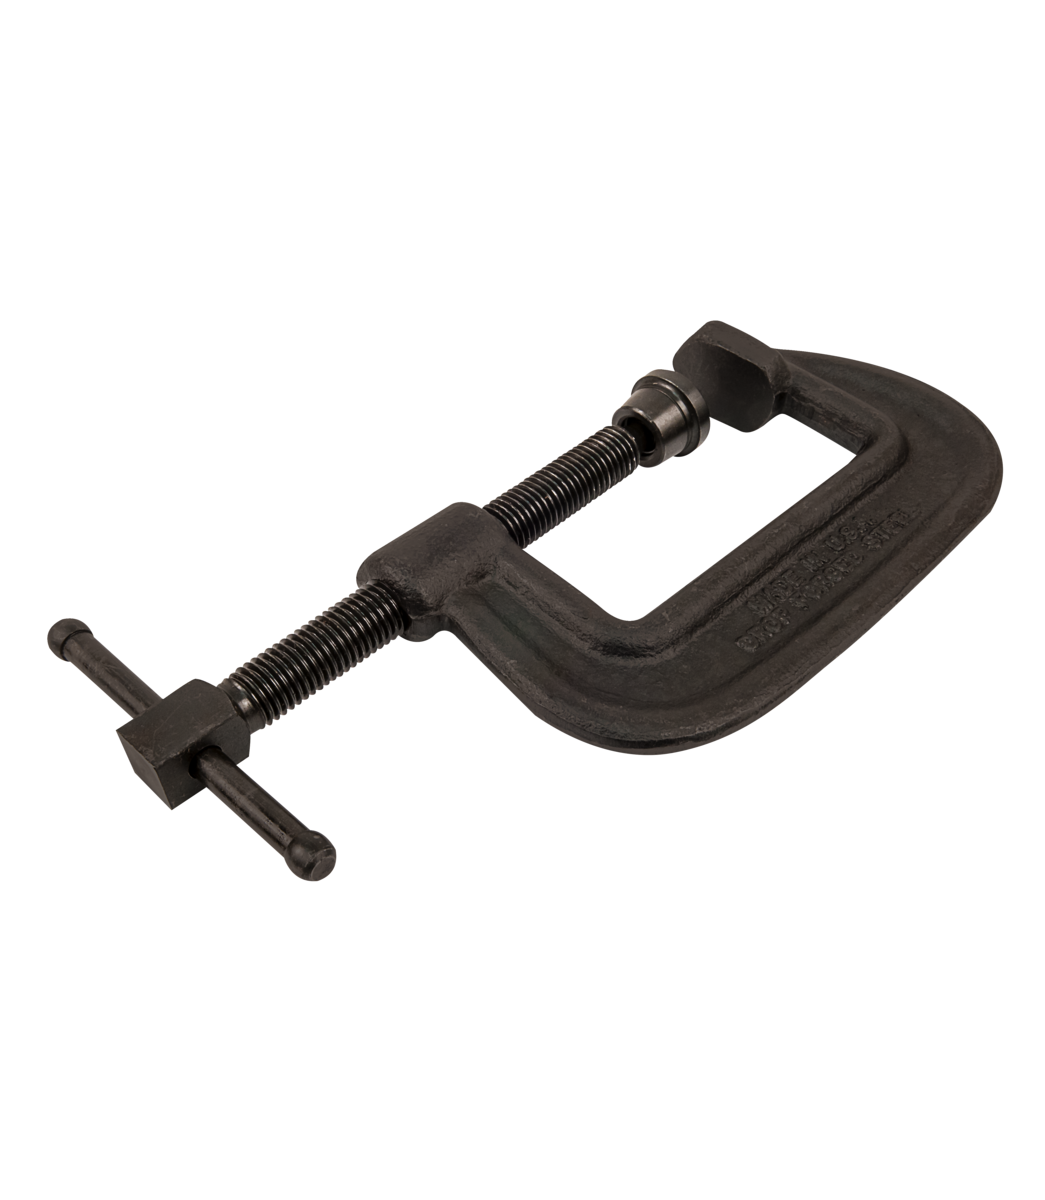 WILTON 100 Series Forged C-Clamp - Heavy-Duty 0 - 2-15/16” Opening Capacity